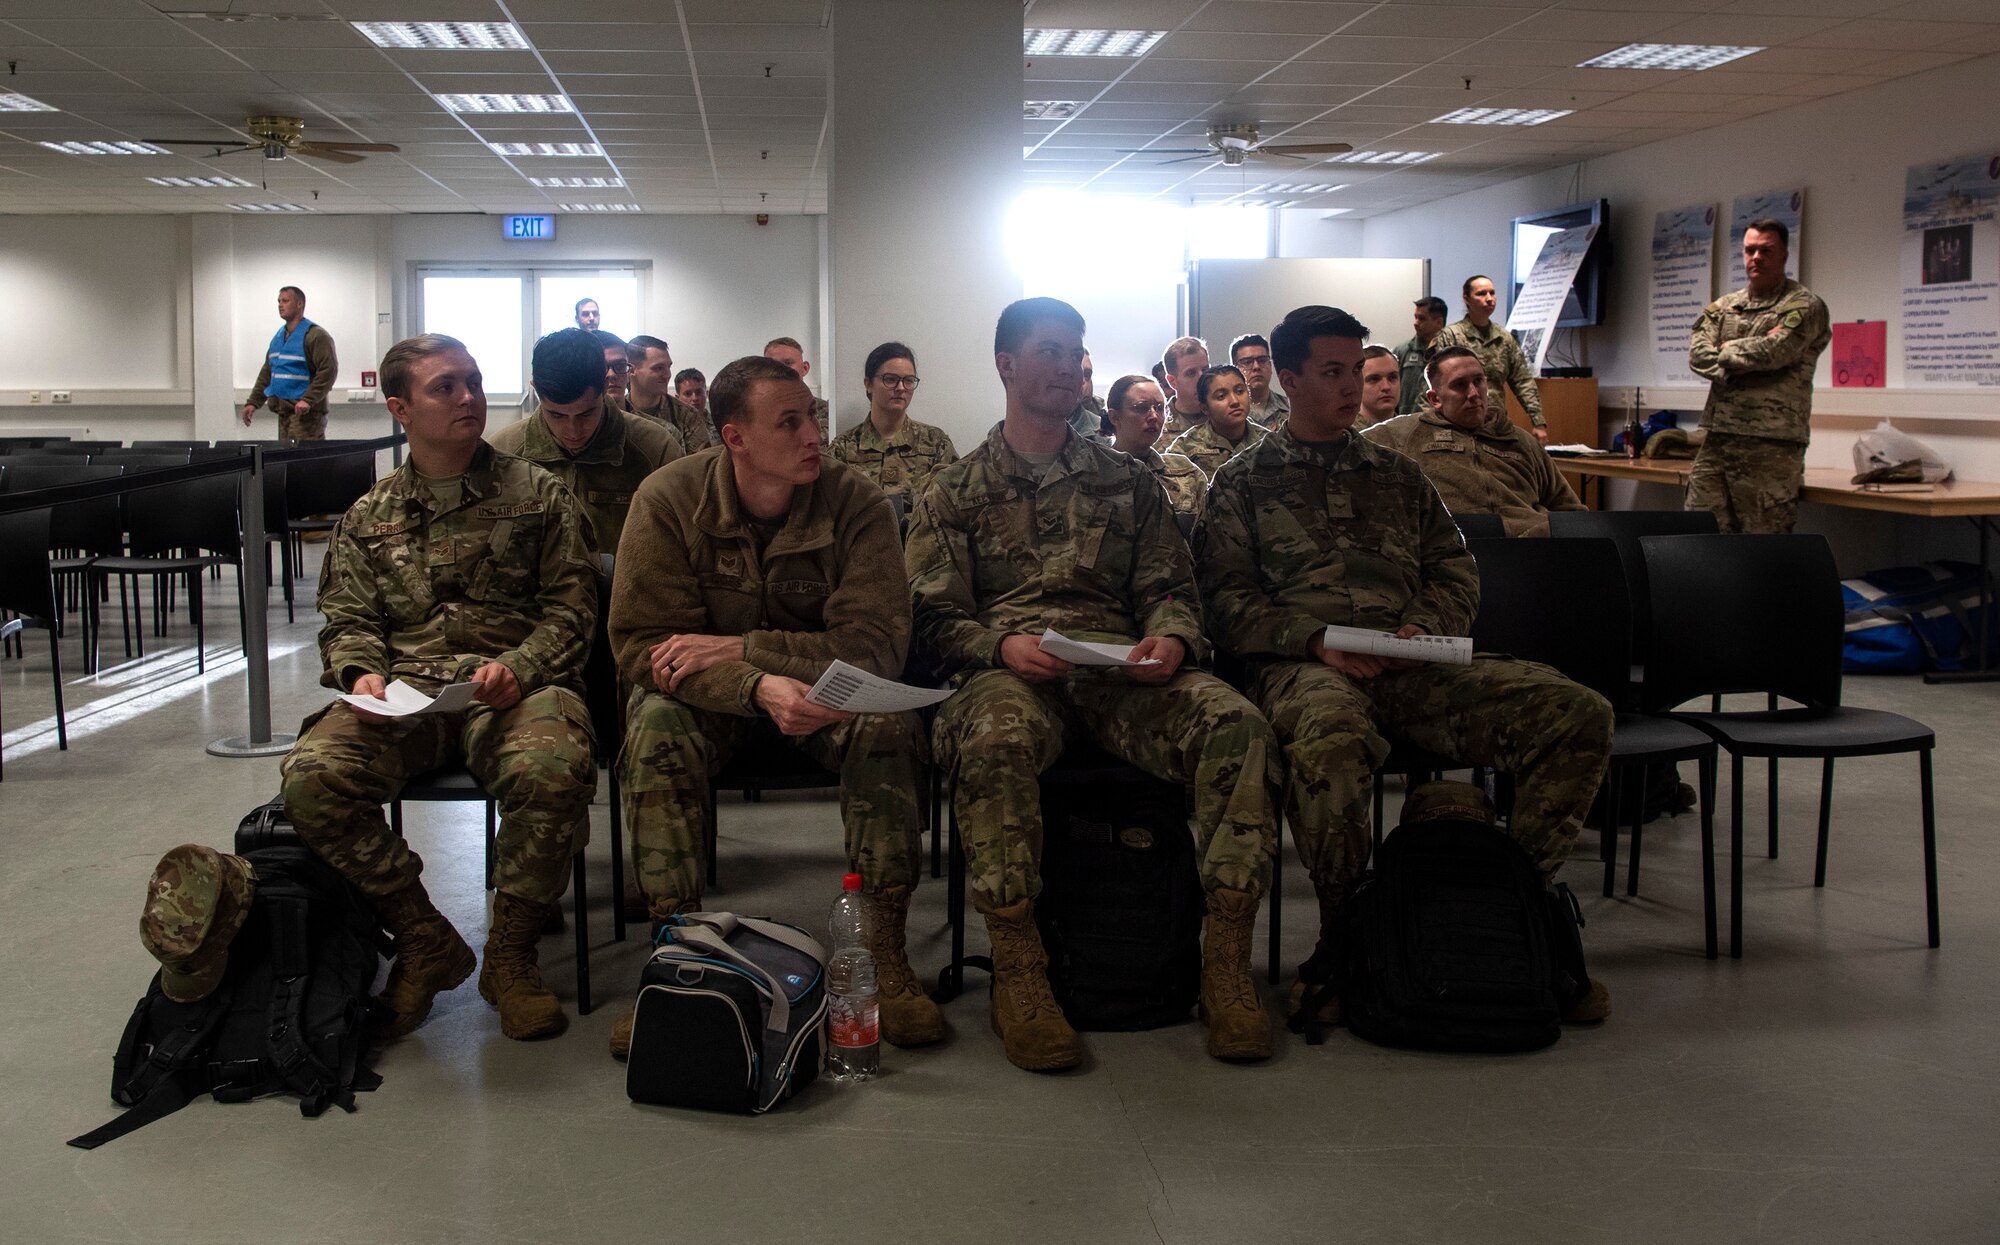 U.S. Air Force Airmen from the 52nd Fighter Wing hold orders while waiting to leave for a simulated deployment at Spangdahlem Air Base, Germany, Dec. 17, 2019. They participated in an Agile Combat Employment exercise, a developing concept of operations intended to ensure U.S. Air Forces in Europe are ready for potential contingencies. (U.S. Air Force photo by Airman 1st Class Valerie Seelye)